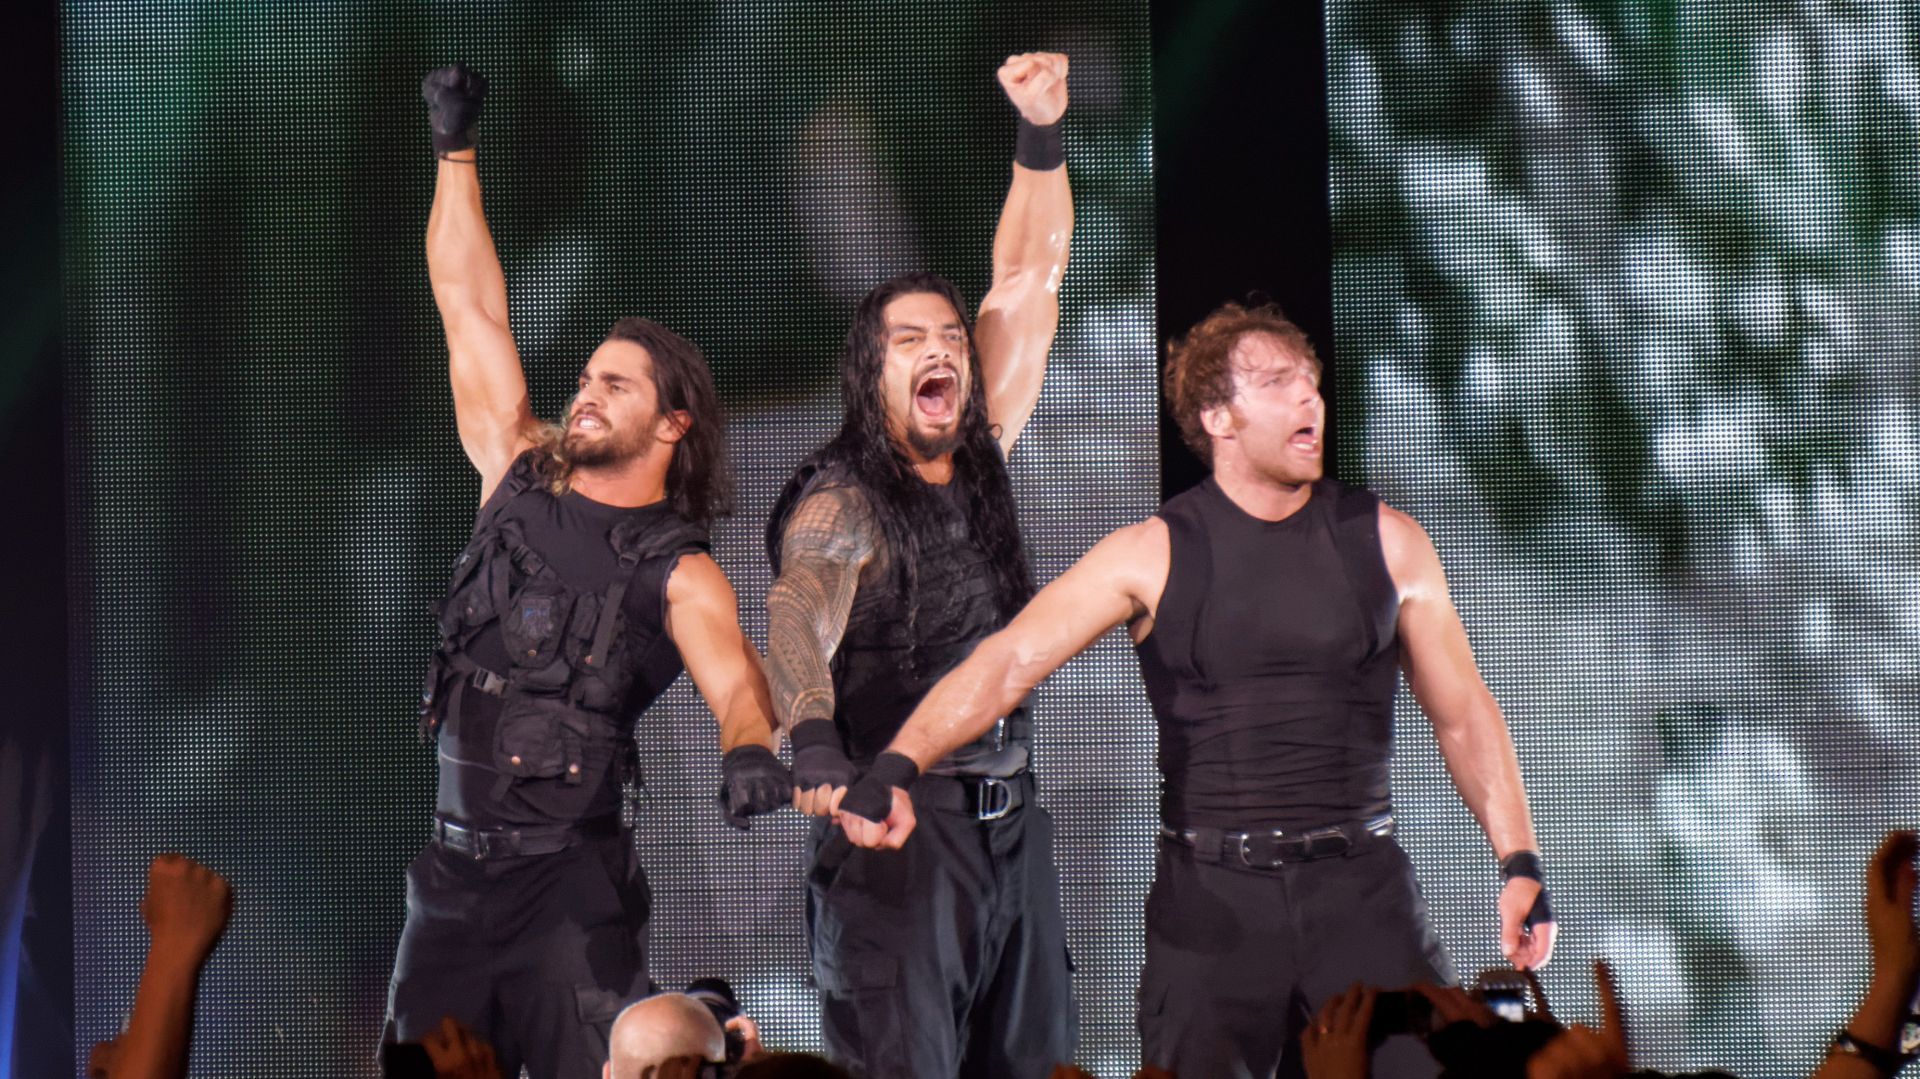 Dean Ambrose was the glue that held The Shield together!